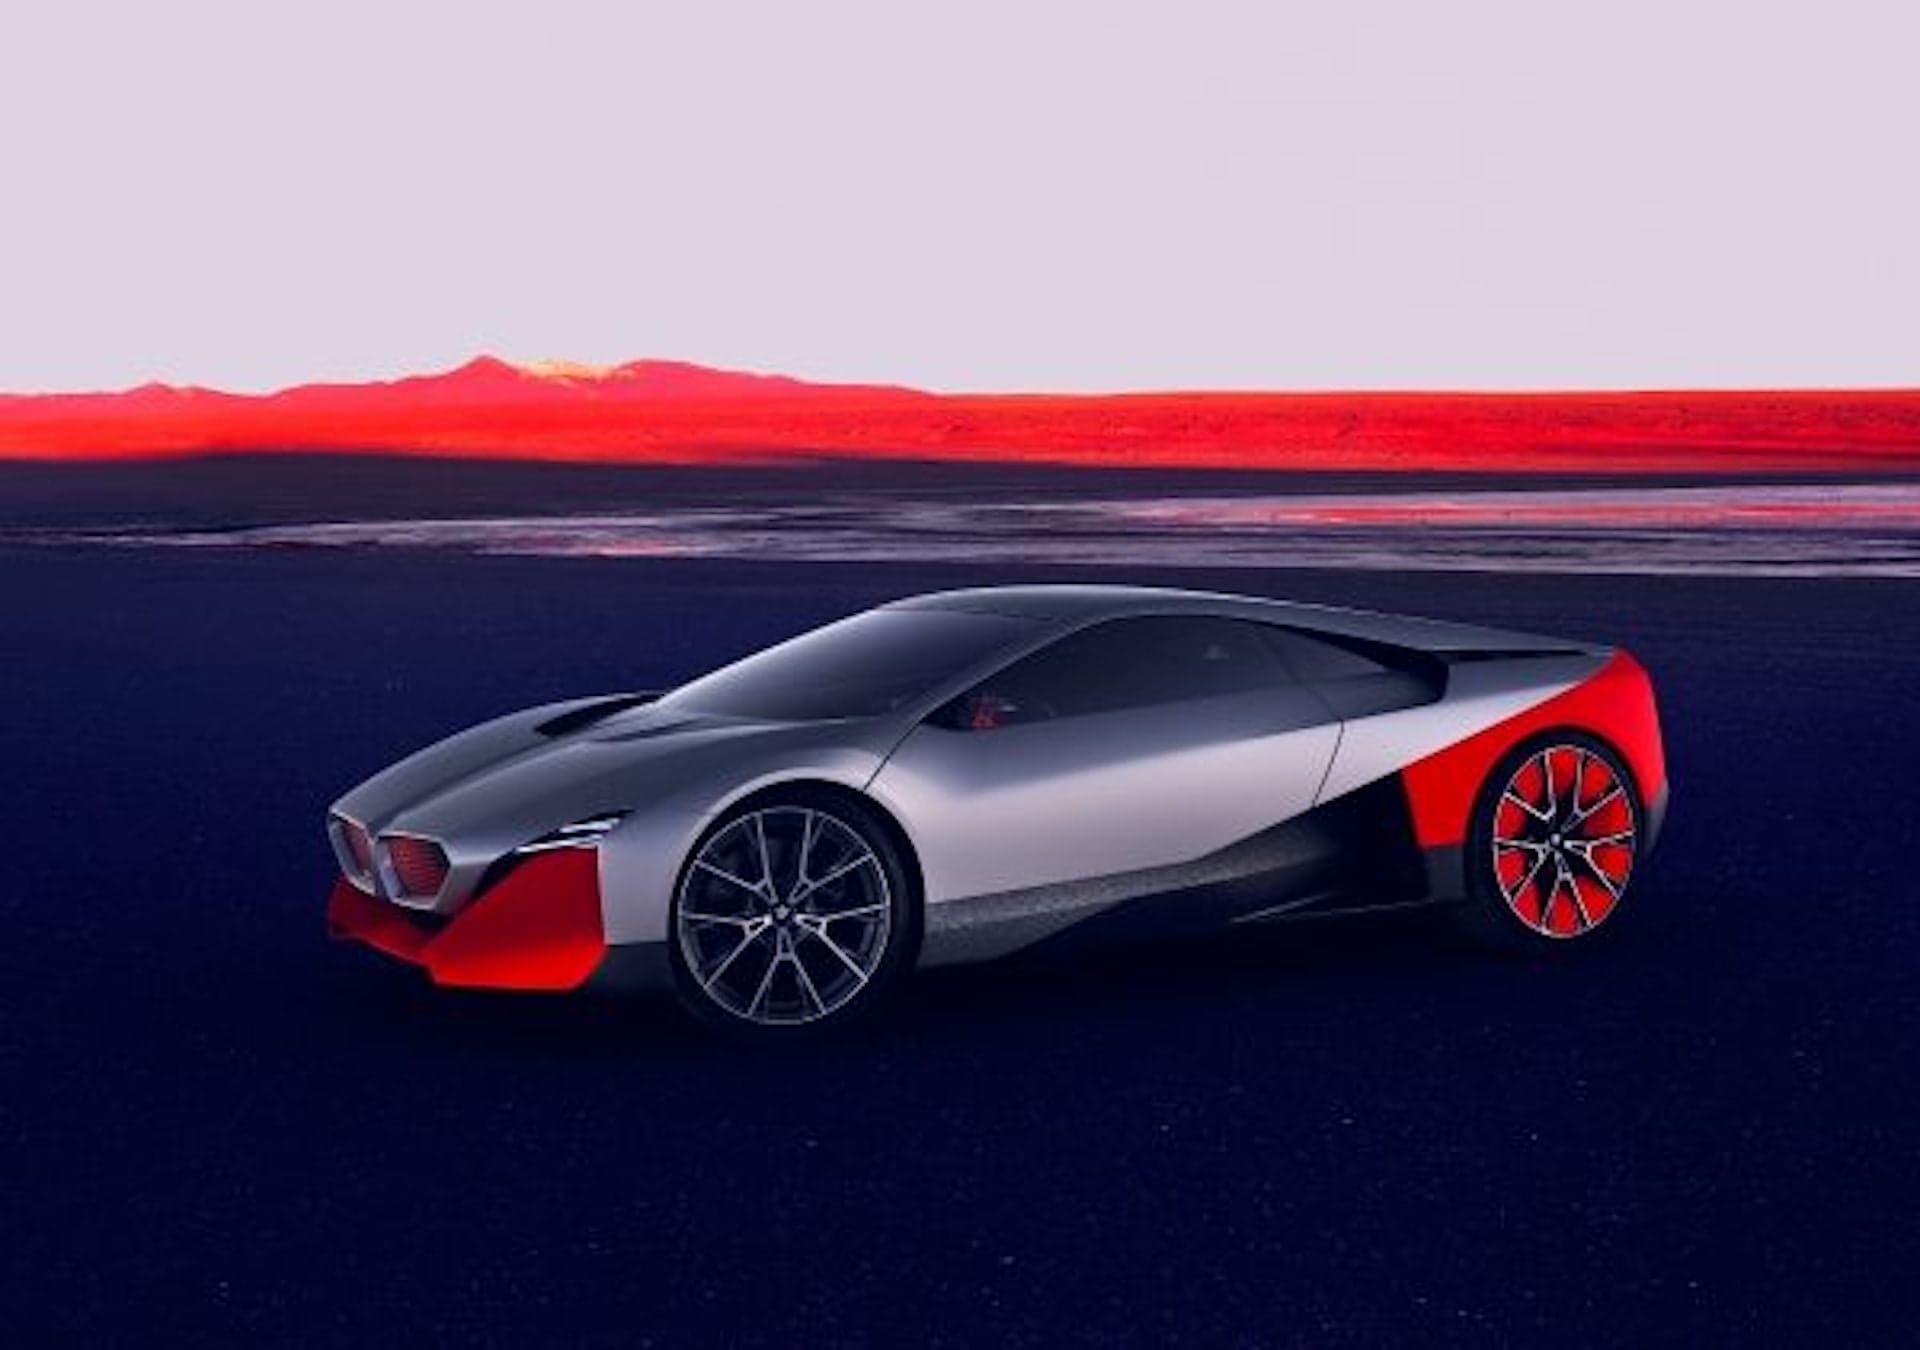 BMW Vision M Next Will Feature Sounds by Famous Composer, Music Legend Hans Zimmer